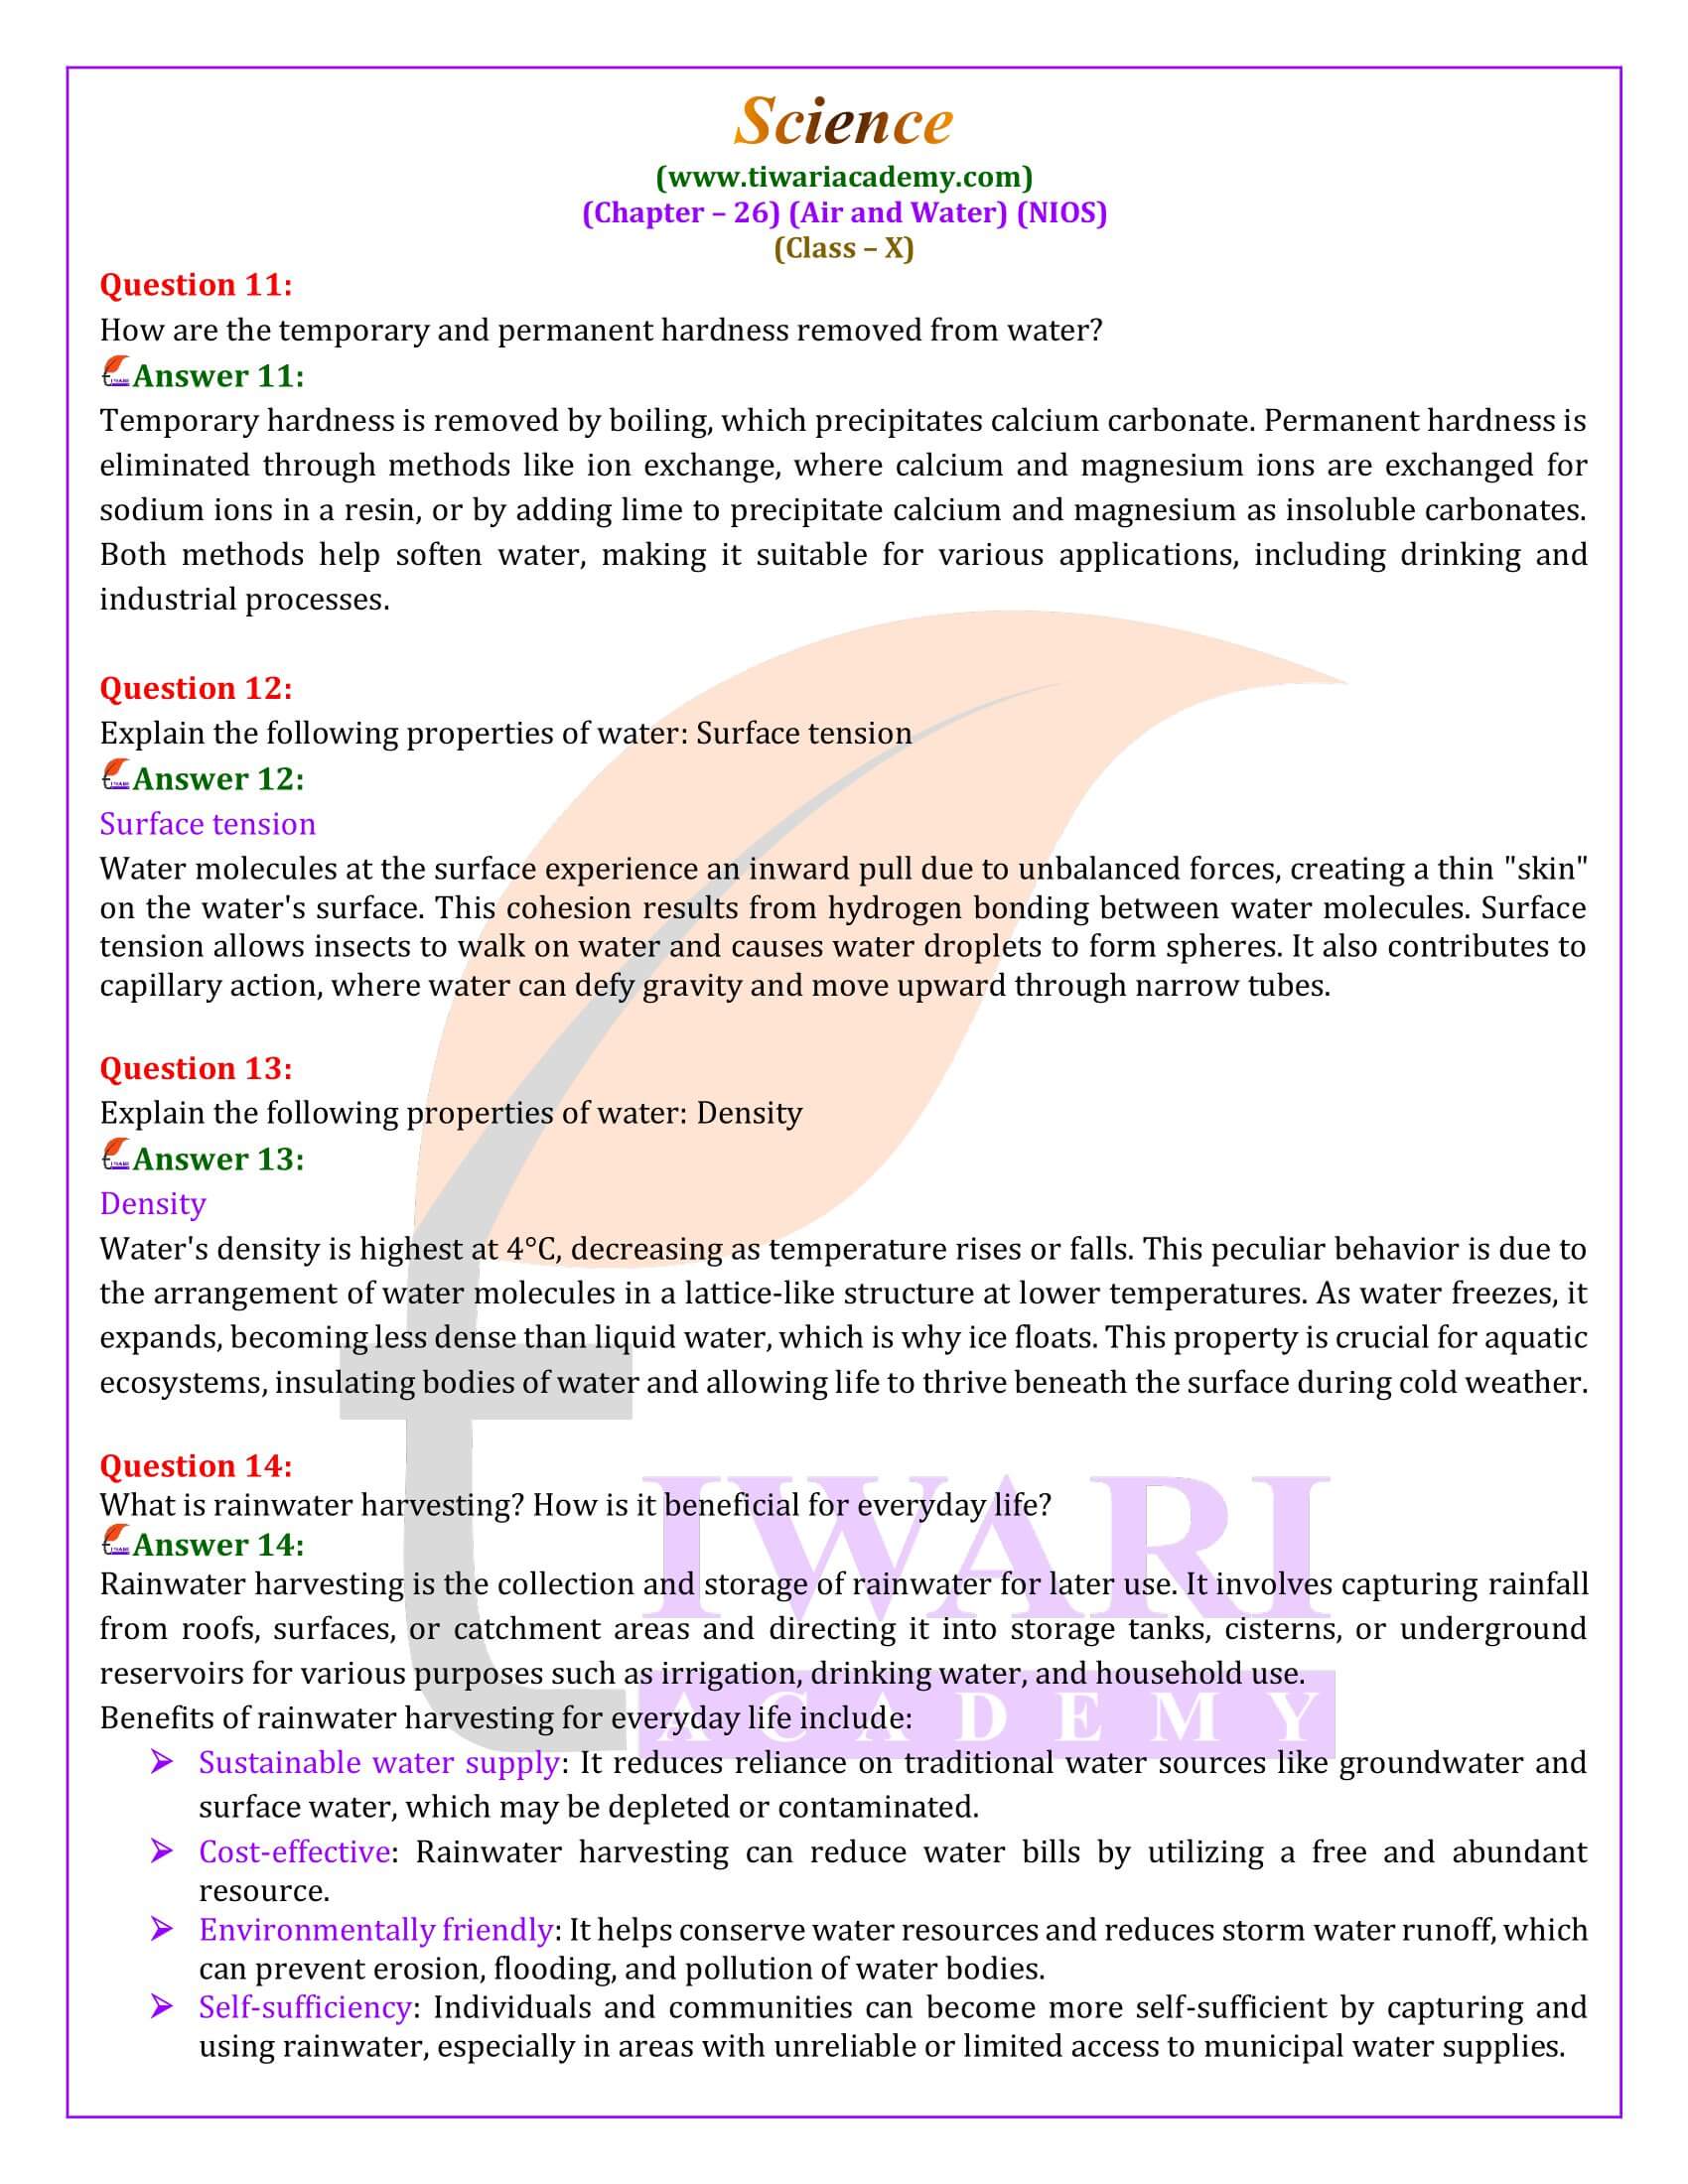 NIOS Class 10 Science Chapter 26 guide in English